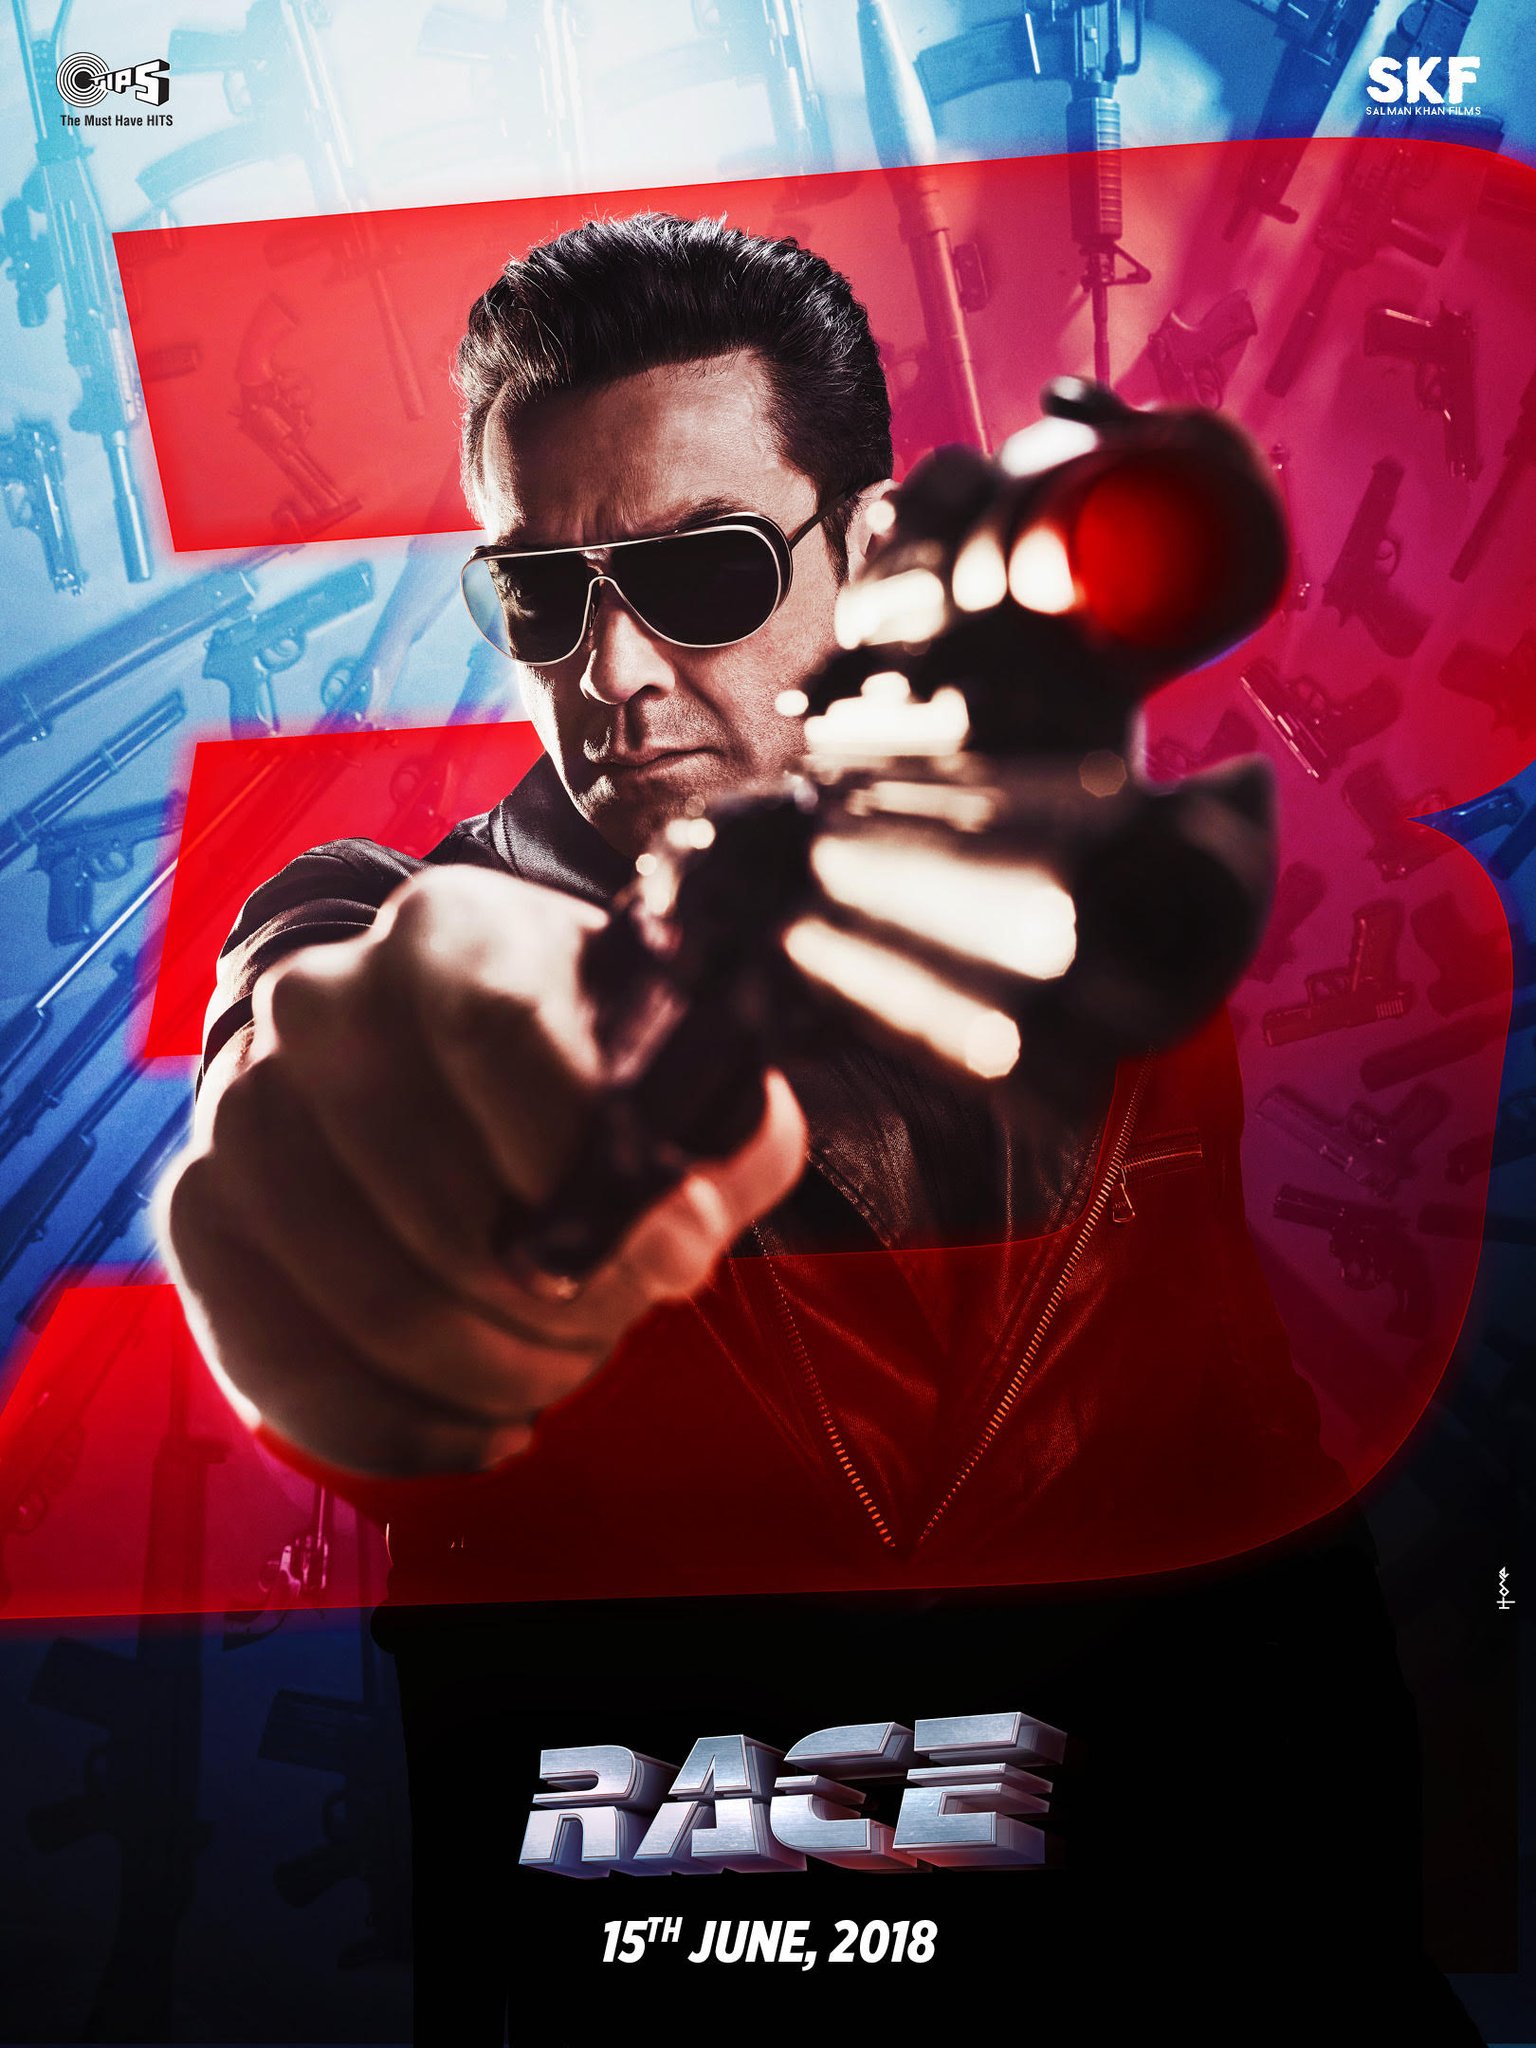 Bobby Deol as Yash - The Main Man - Race 3 Poster